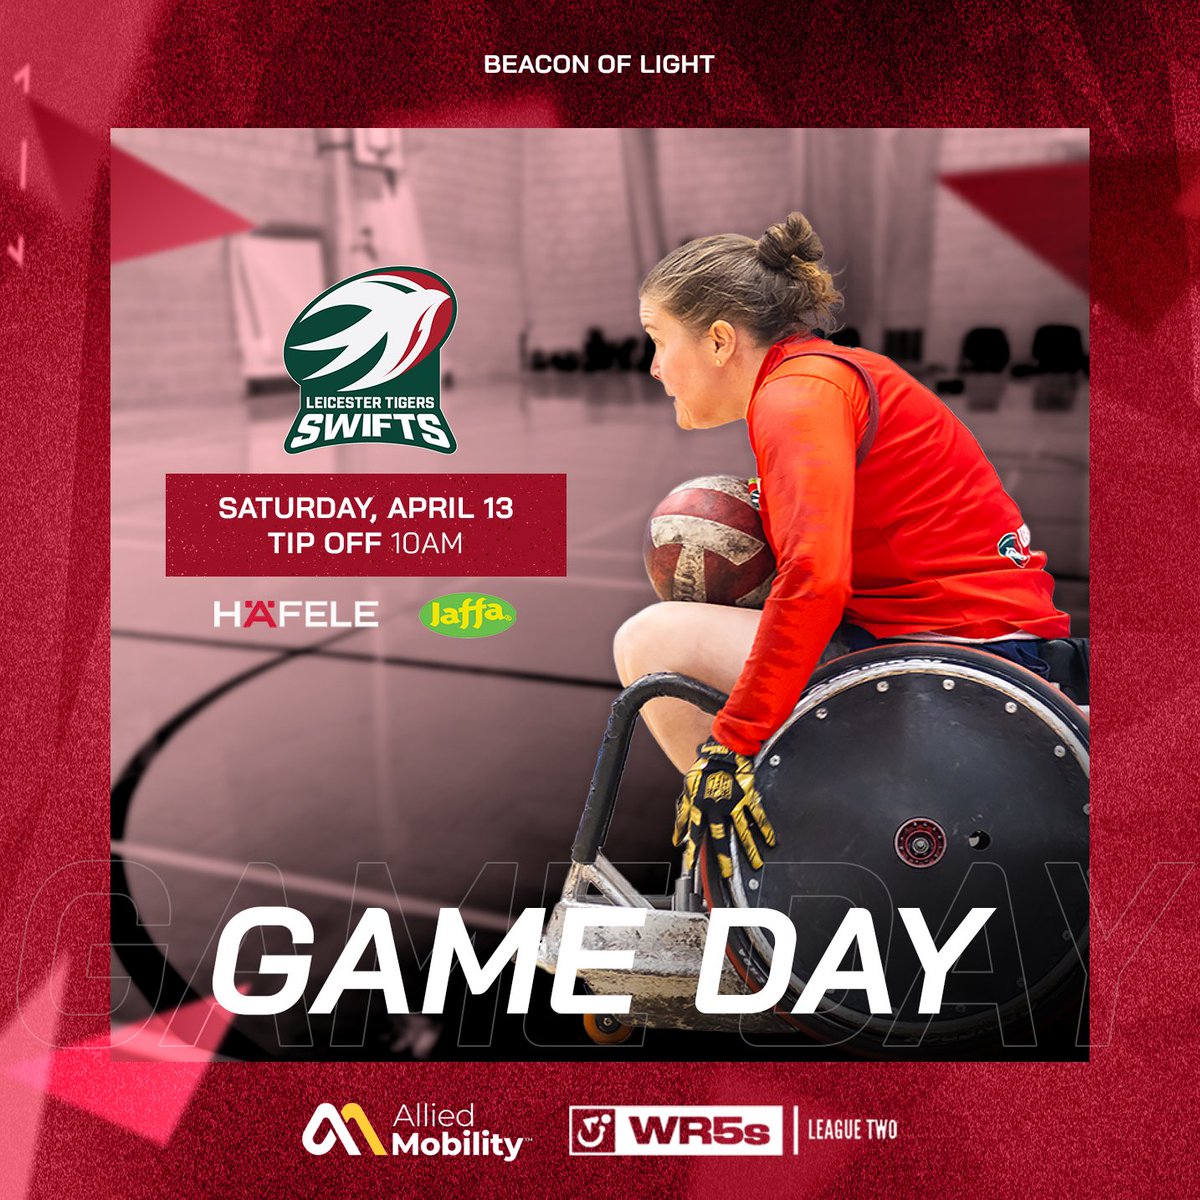 𝑮𝒂𝒎𝒆 𝑫𝒂𝒚 🏉 The Leicester Tigers Swifts are competing in the first Wheelchair Rugby Fives tournament of 2024 today 💪 To stay up to date with the action, click the link in the Foundation’s bio 🔗 #WheelchairRugby #WCR #Rugby #Tigers #LeicesterTigers #wr5